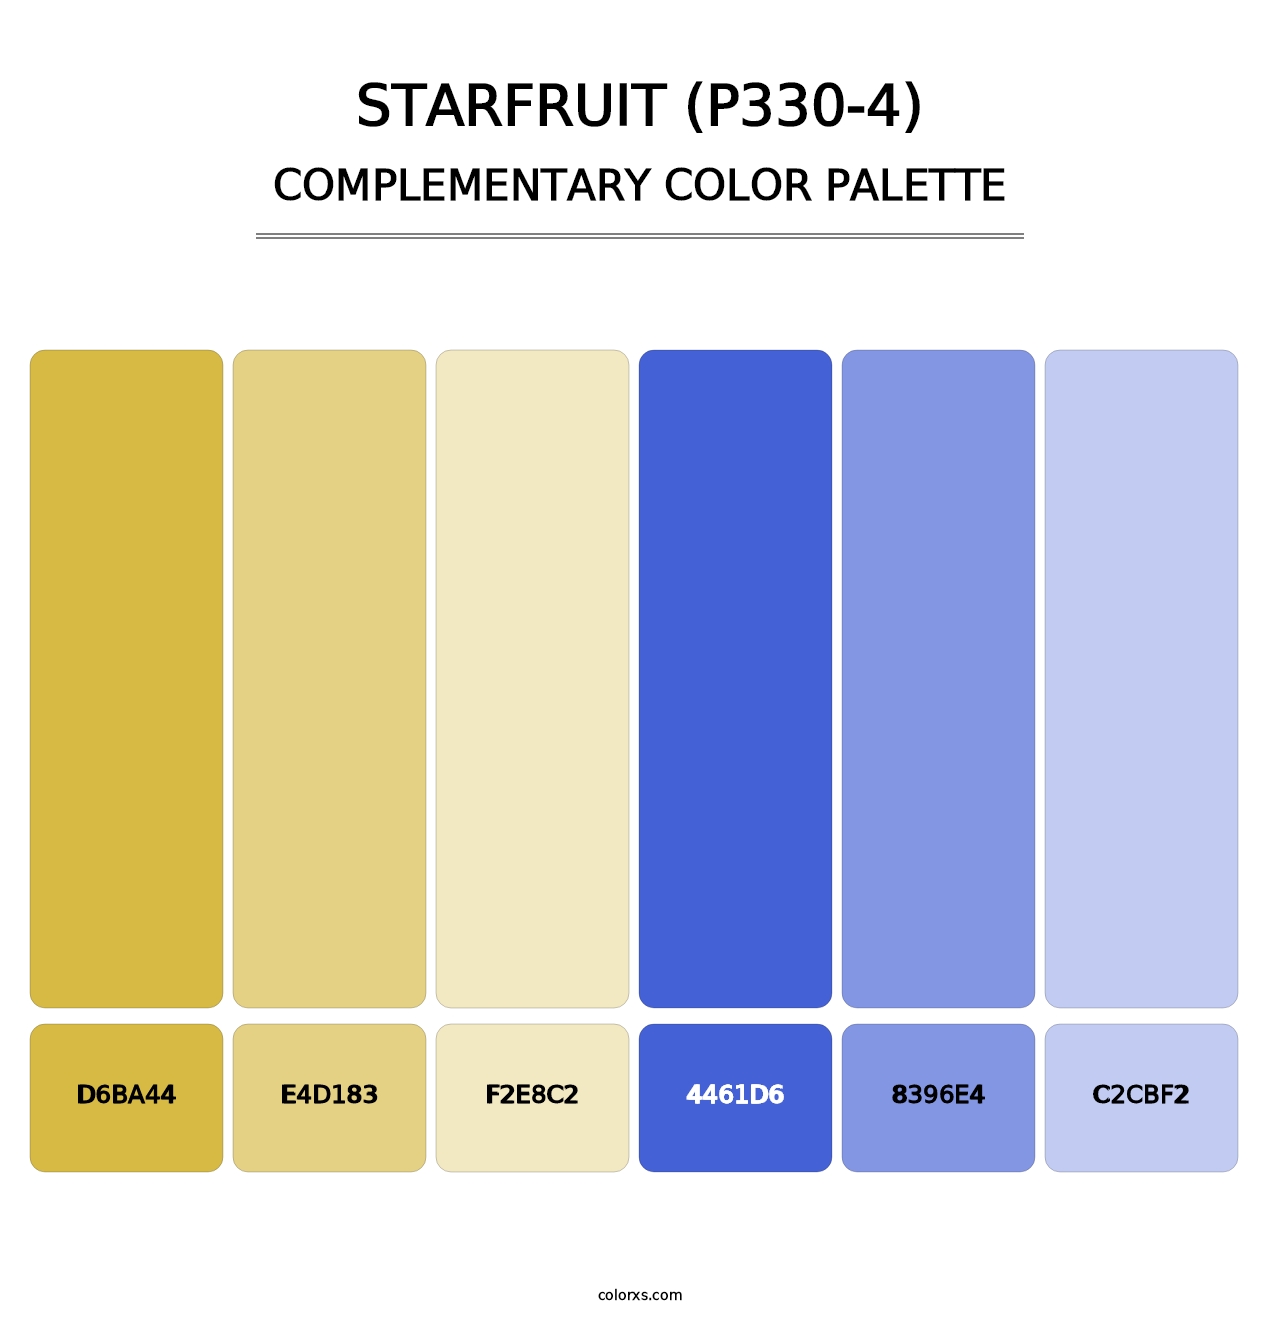 Starfruit (P330-4) - Complementary Color Palette